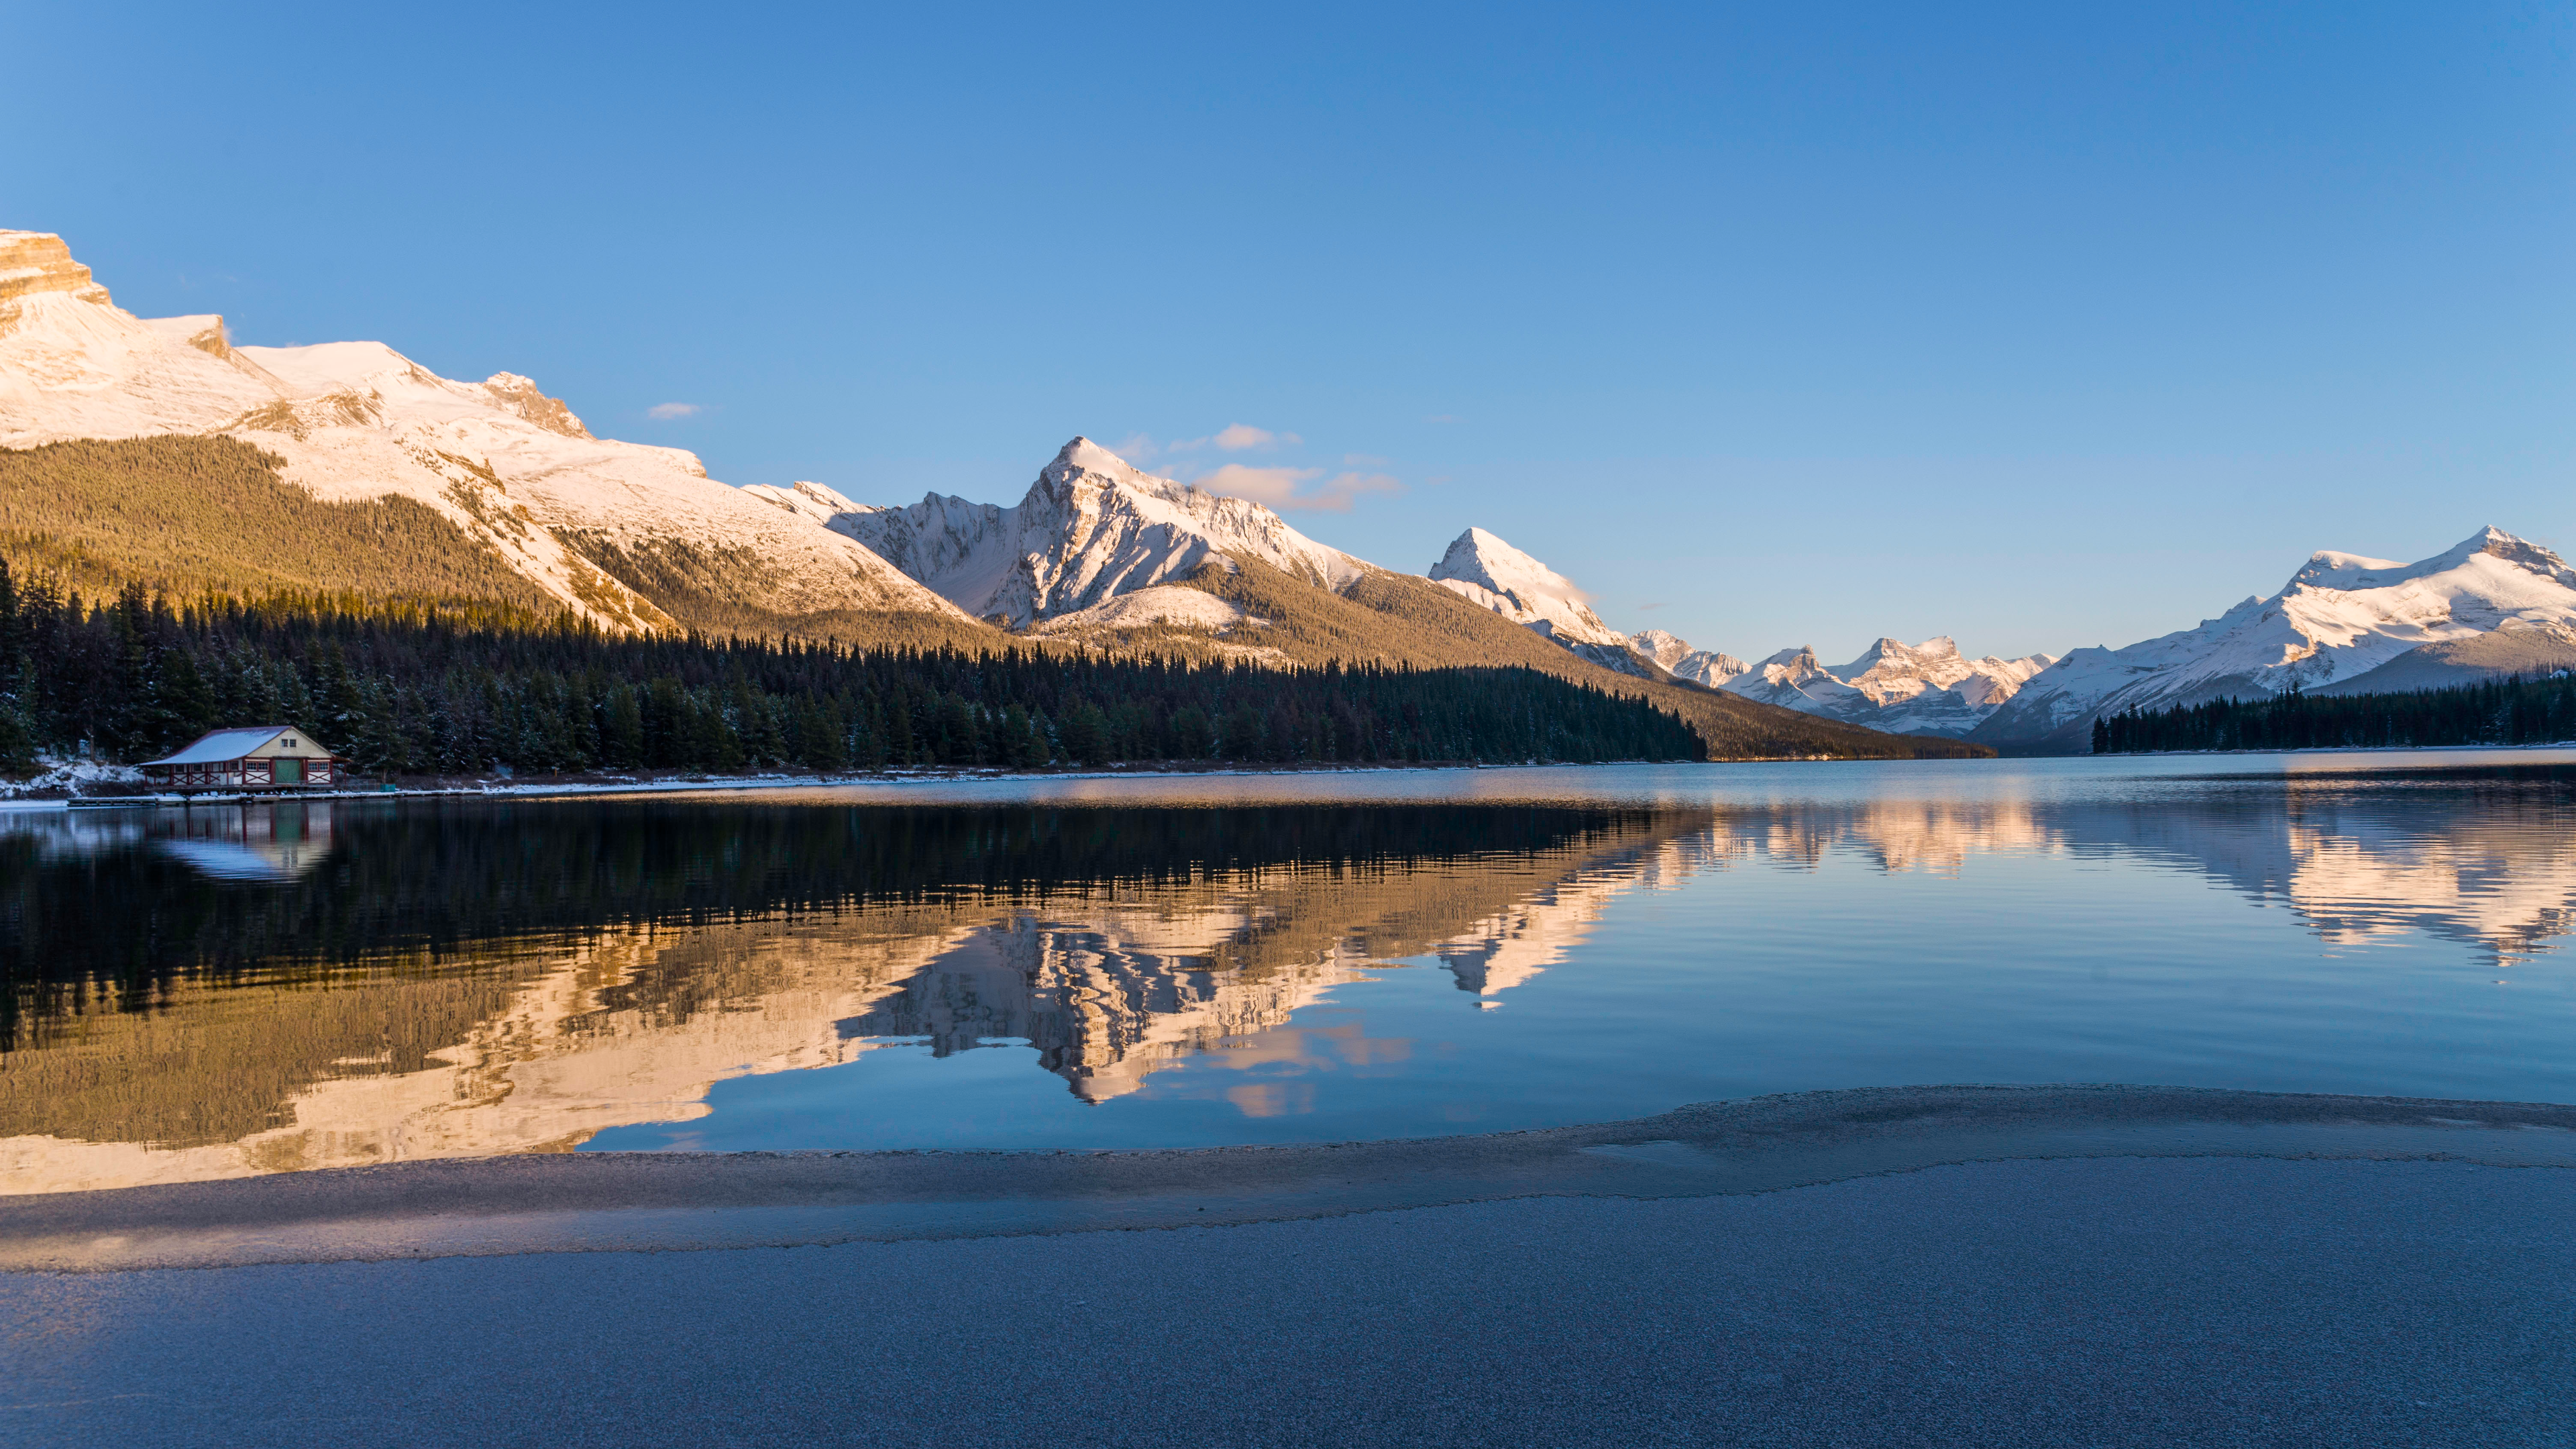 General 3840x2160 nature landscape water sand reflection mountains snow sky trees water ripples Jasper National Park Canada Txema